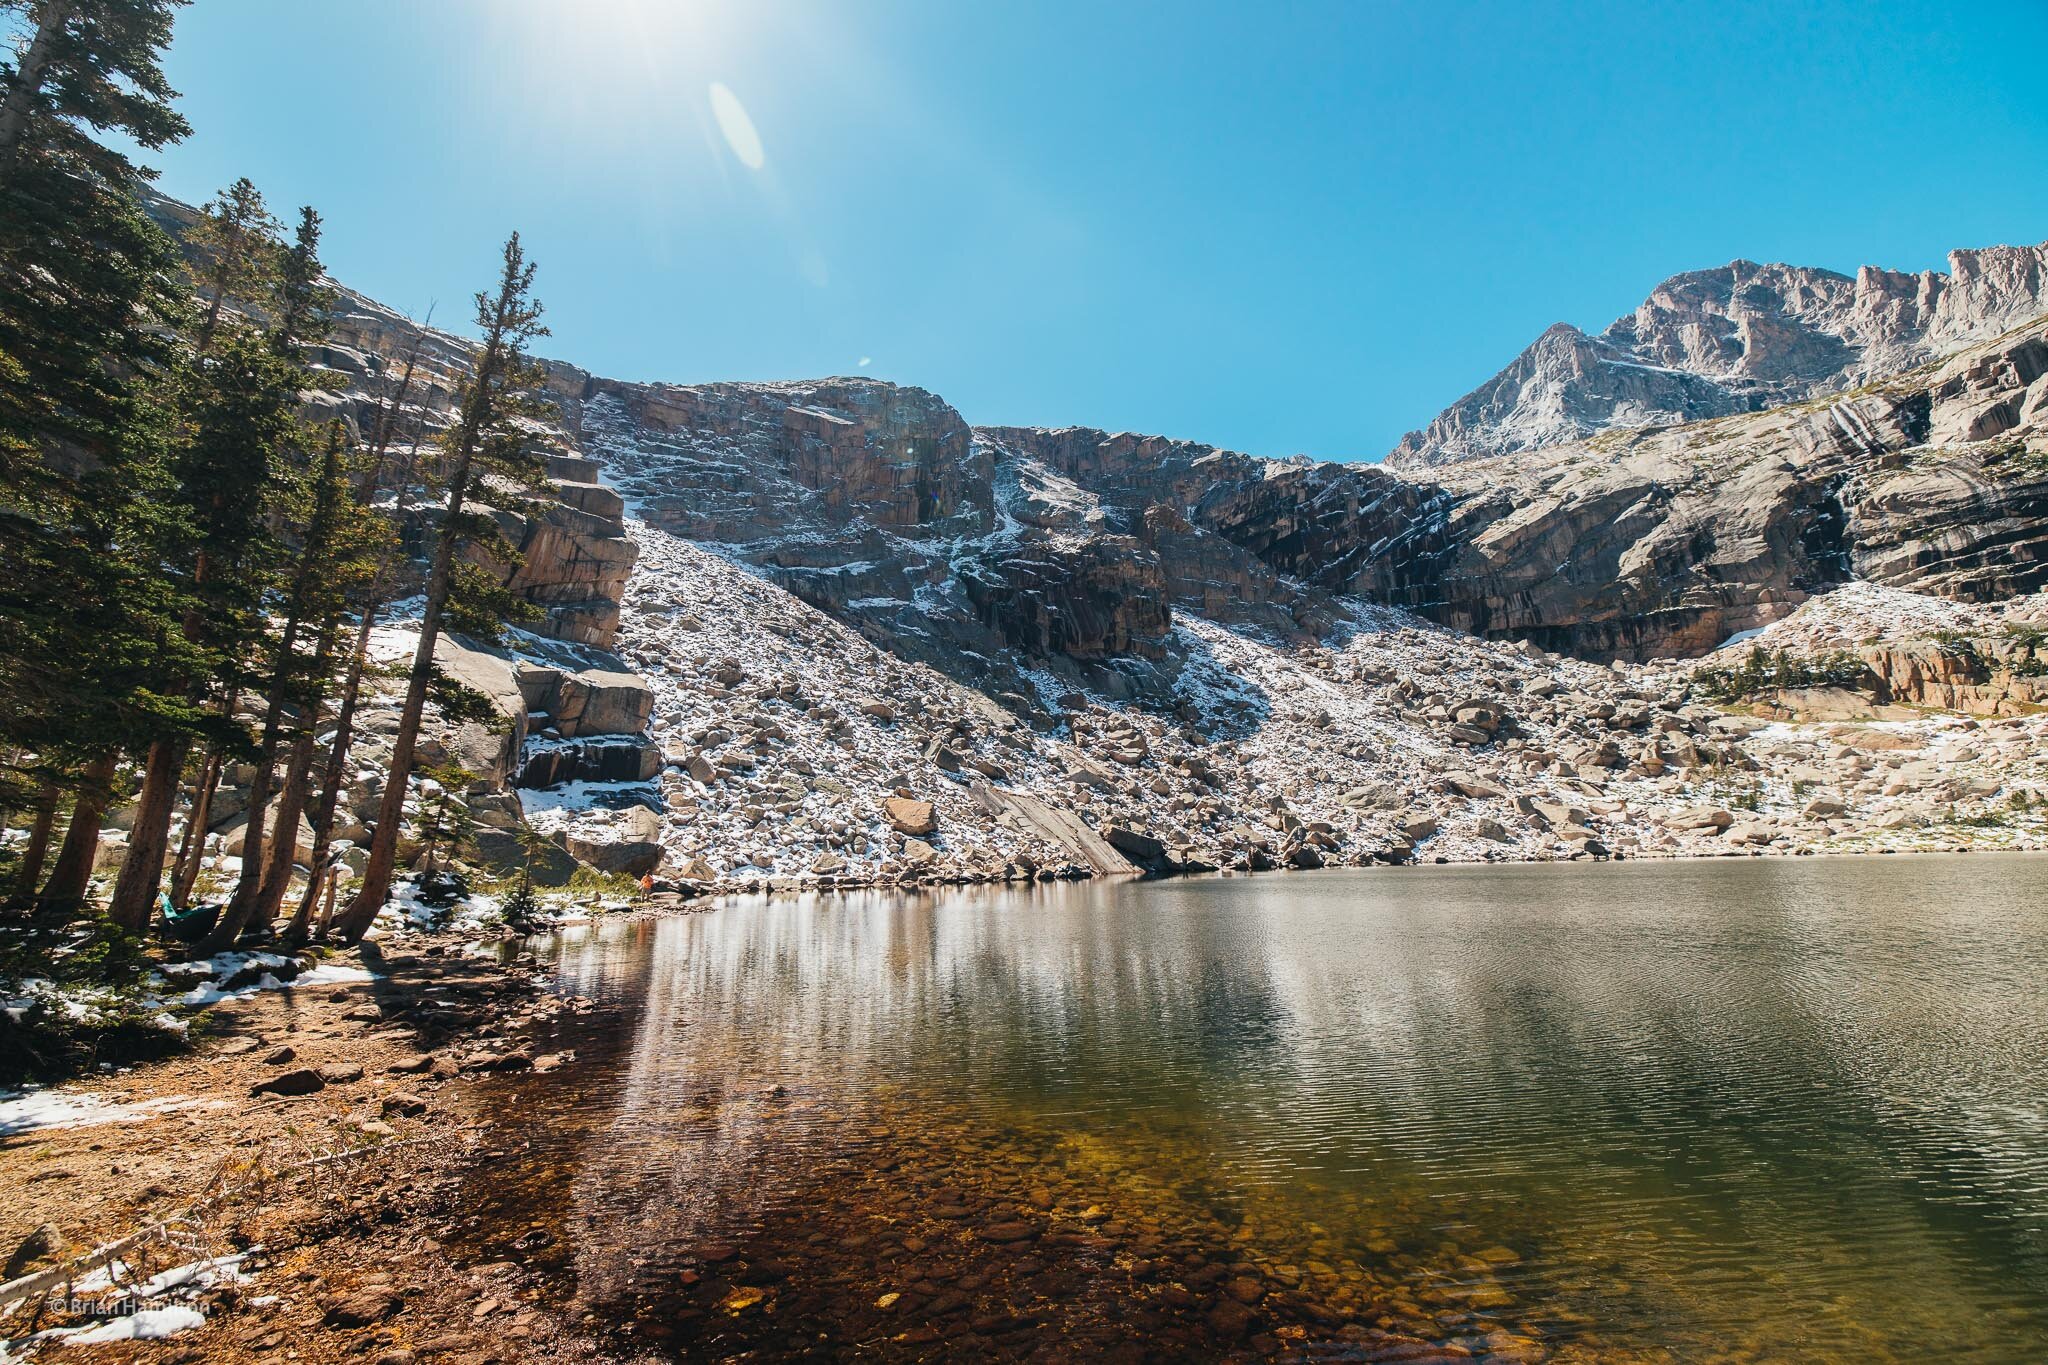 Black Lake Trail - Black Lake Trail is a difficult 9.7 mile heavily trafficked out and back trail located in Rocky Mountain National Park near Estes Park, Colorado that features two waterfalls and two lakes.